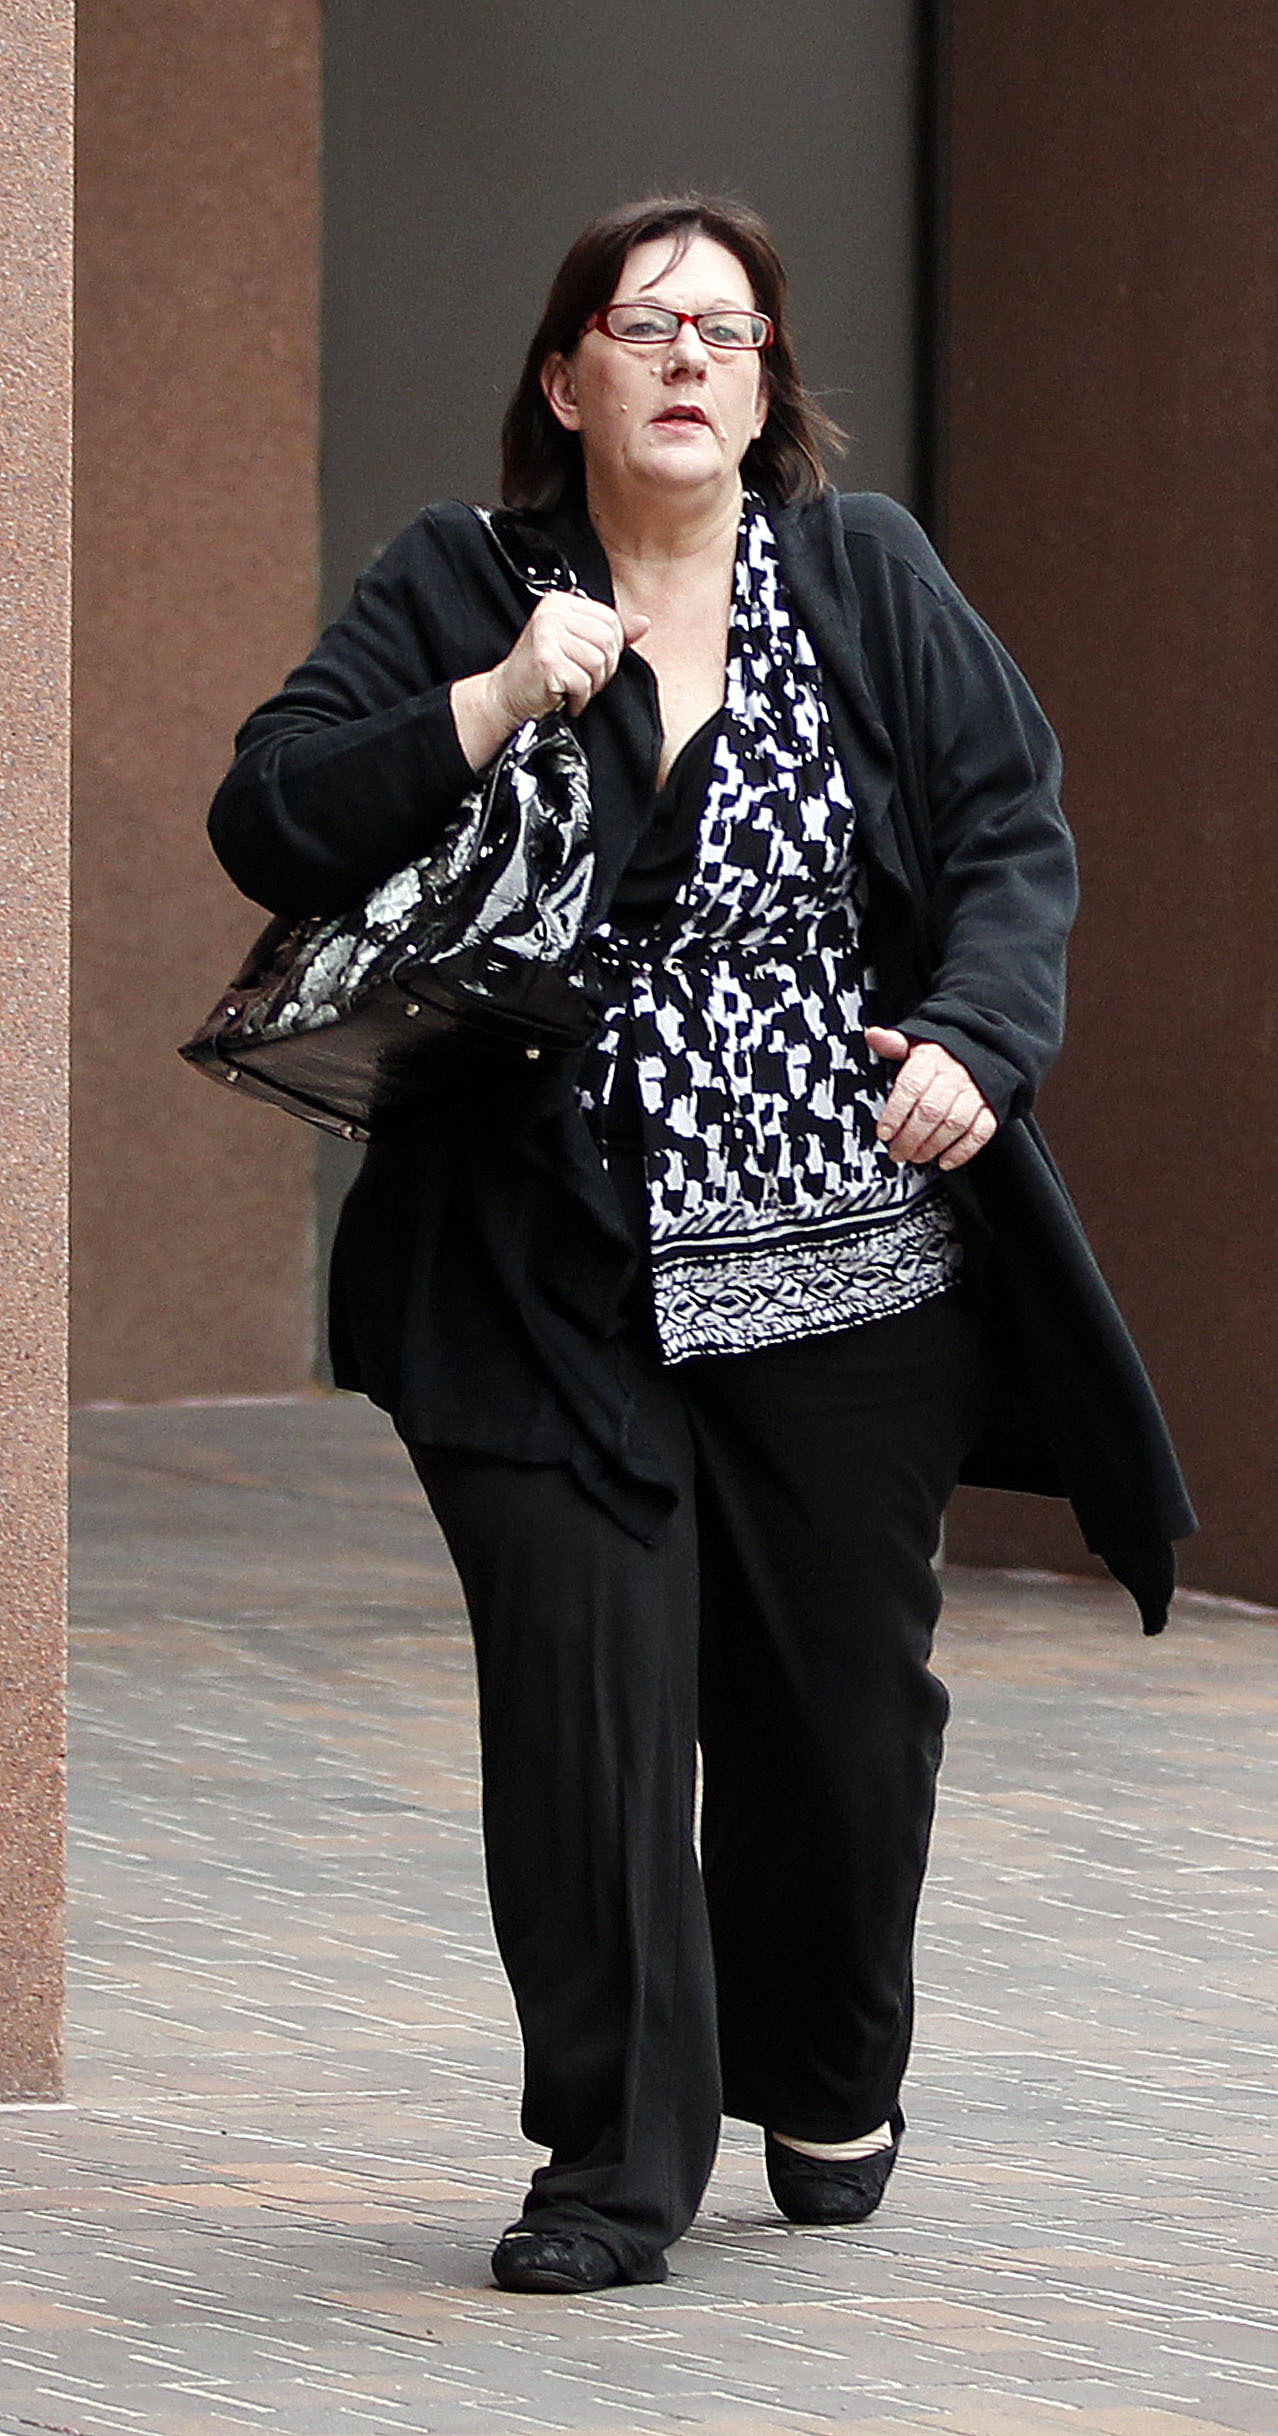 Carla Chambers, arrived at Federal Court downtown,  she and Theresa Erickson were being sentenced for their roles in a baby-selling surrogacy case in San Diego, Calif., on Feb 24, 2012. (John Gastaldo—Zuma)